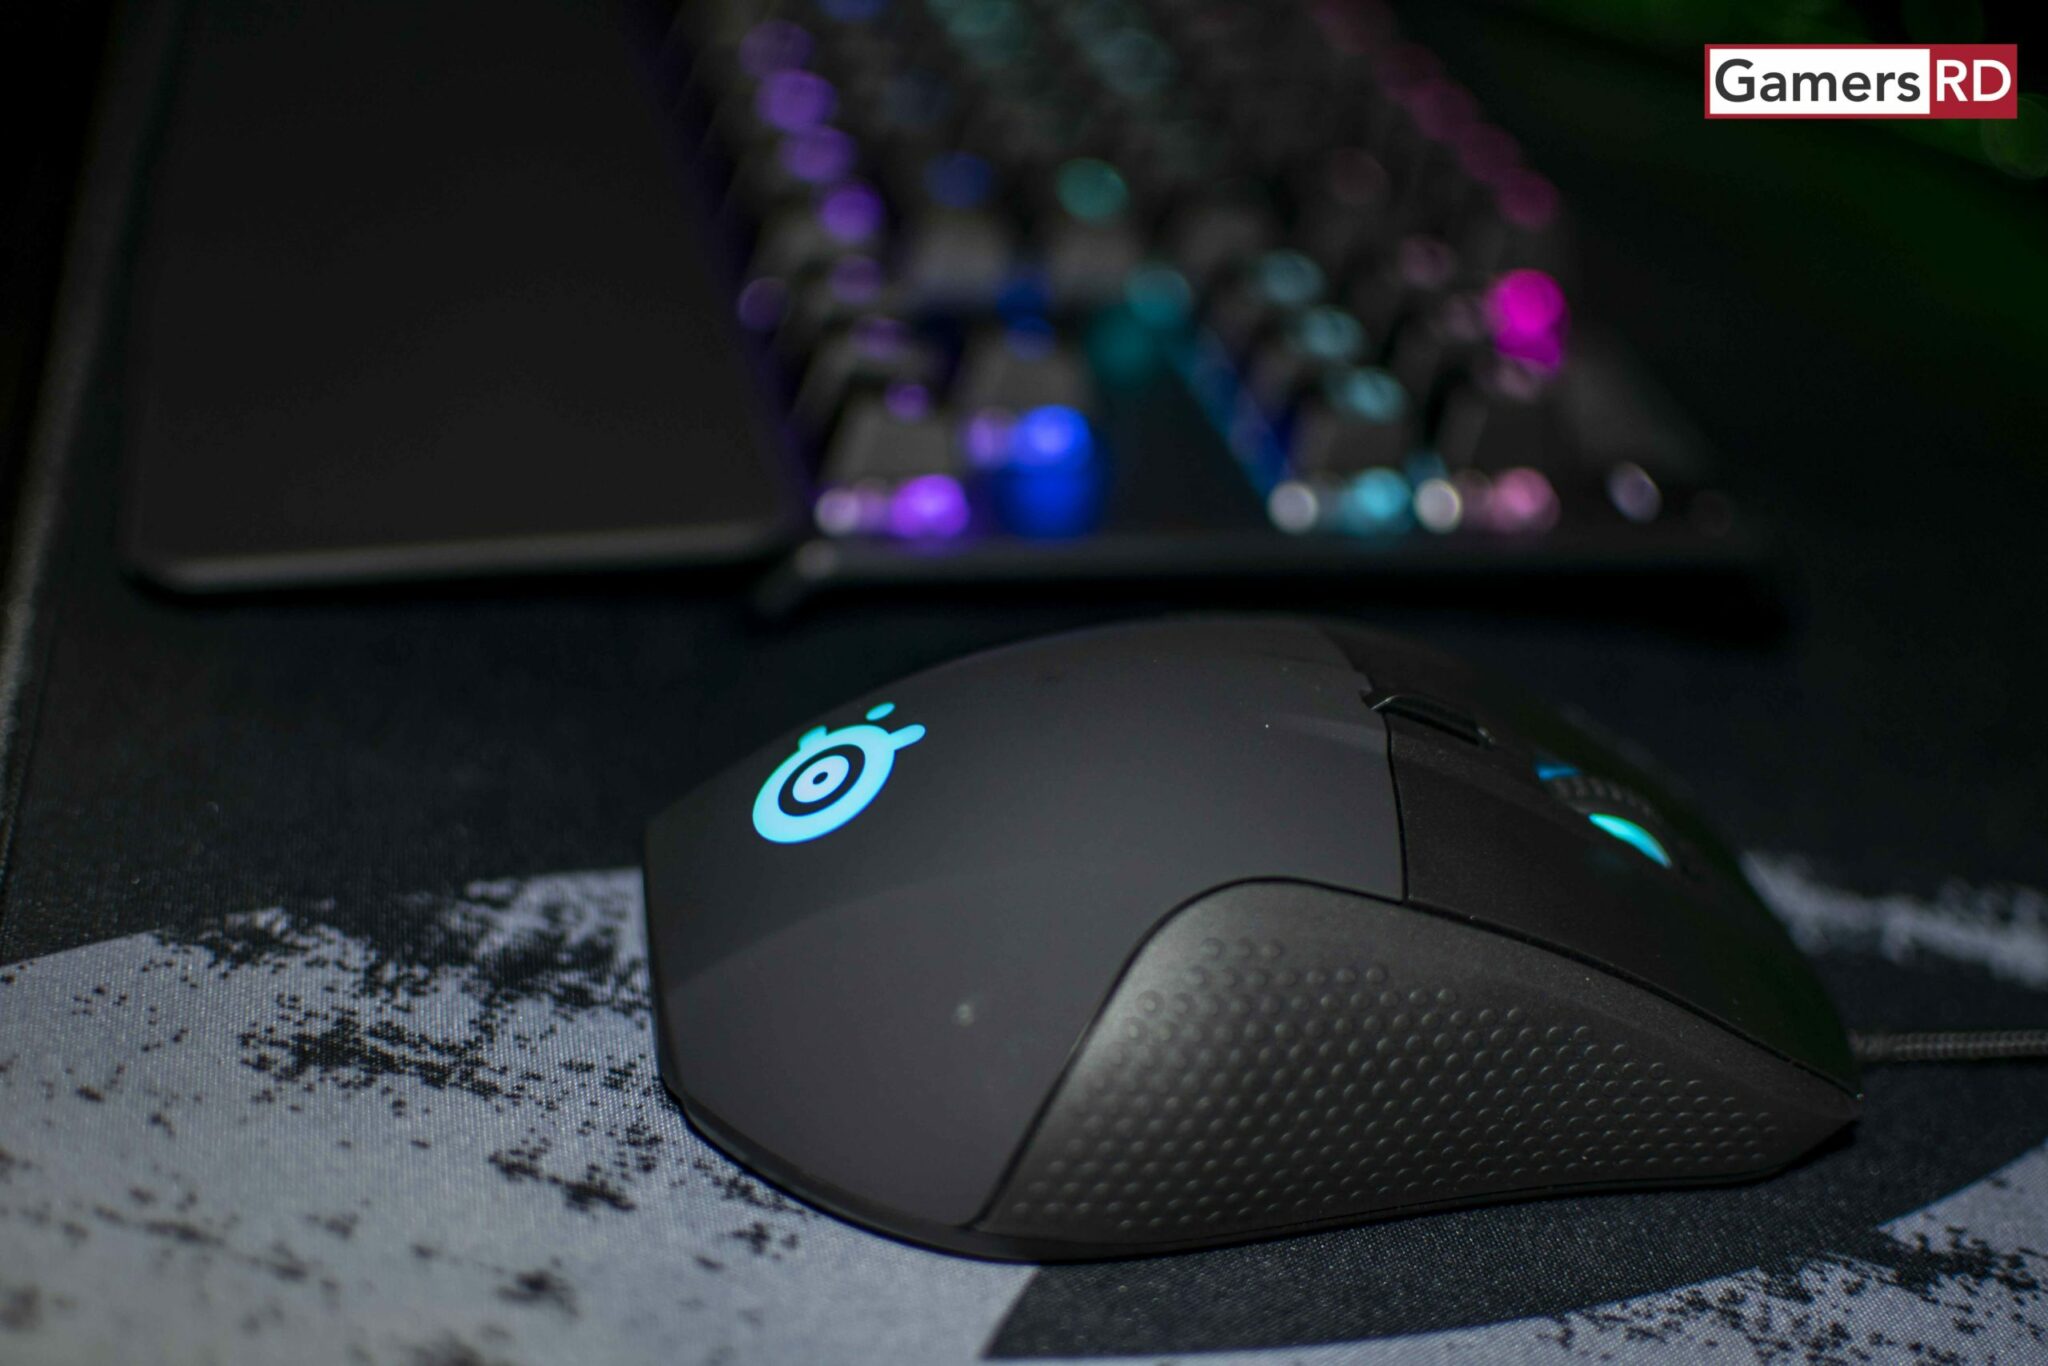 SteelSeries Rival 710 Gaming Mouse Review, 6 GamersRd